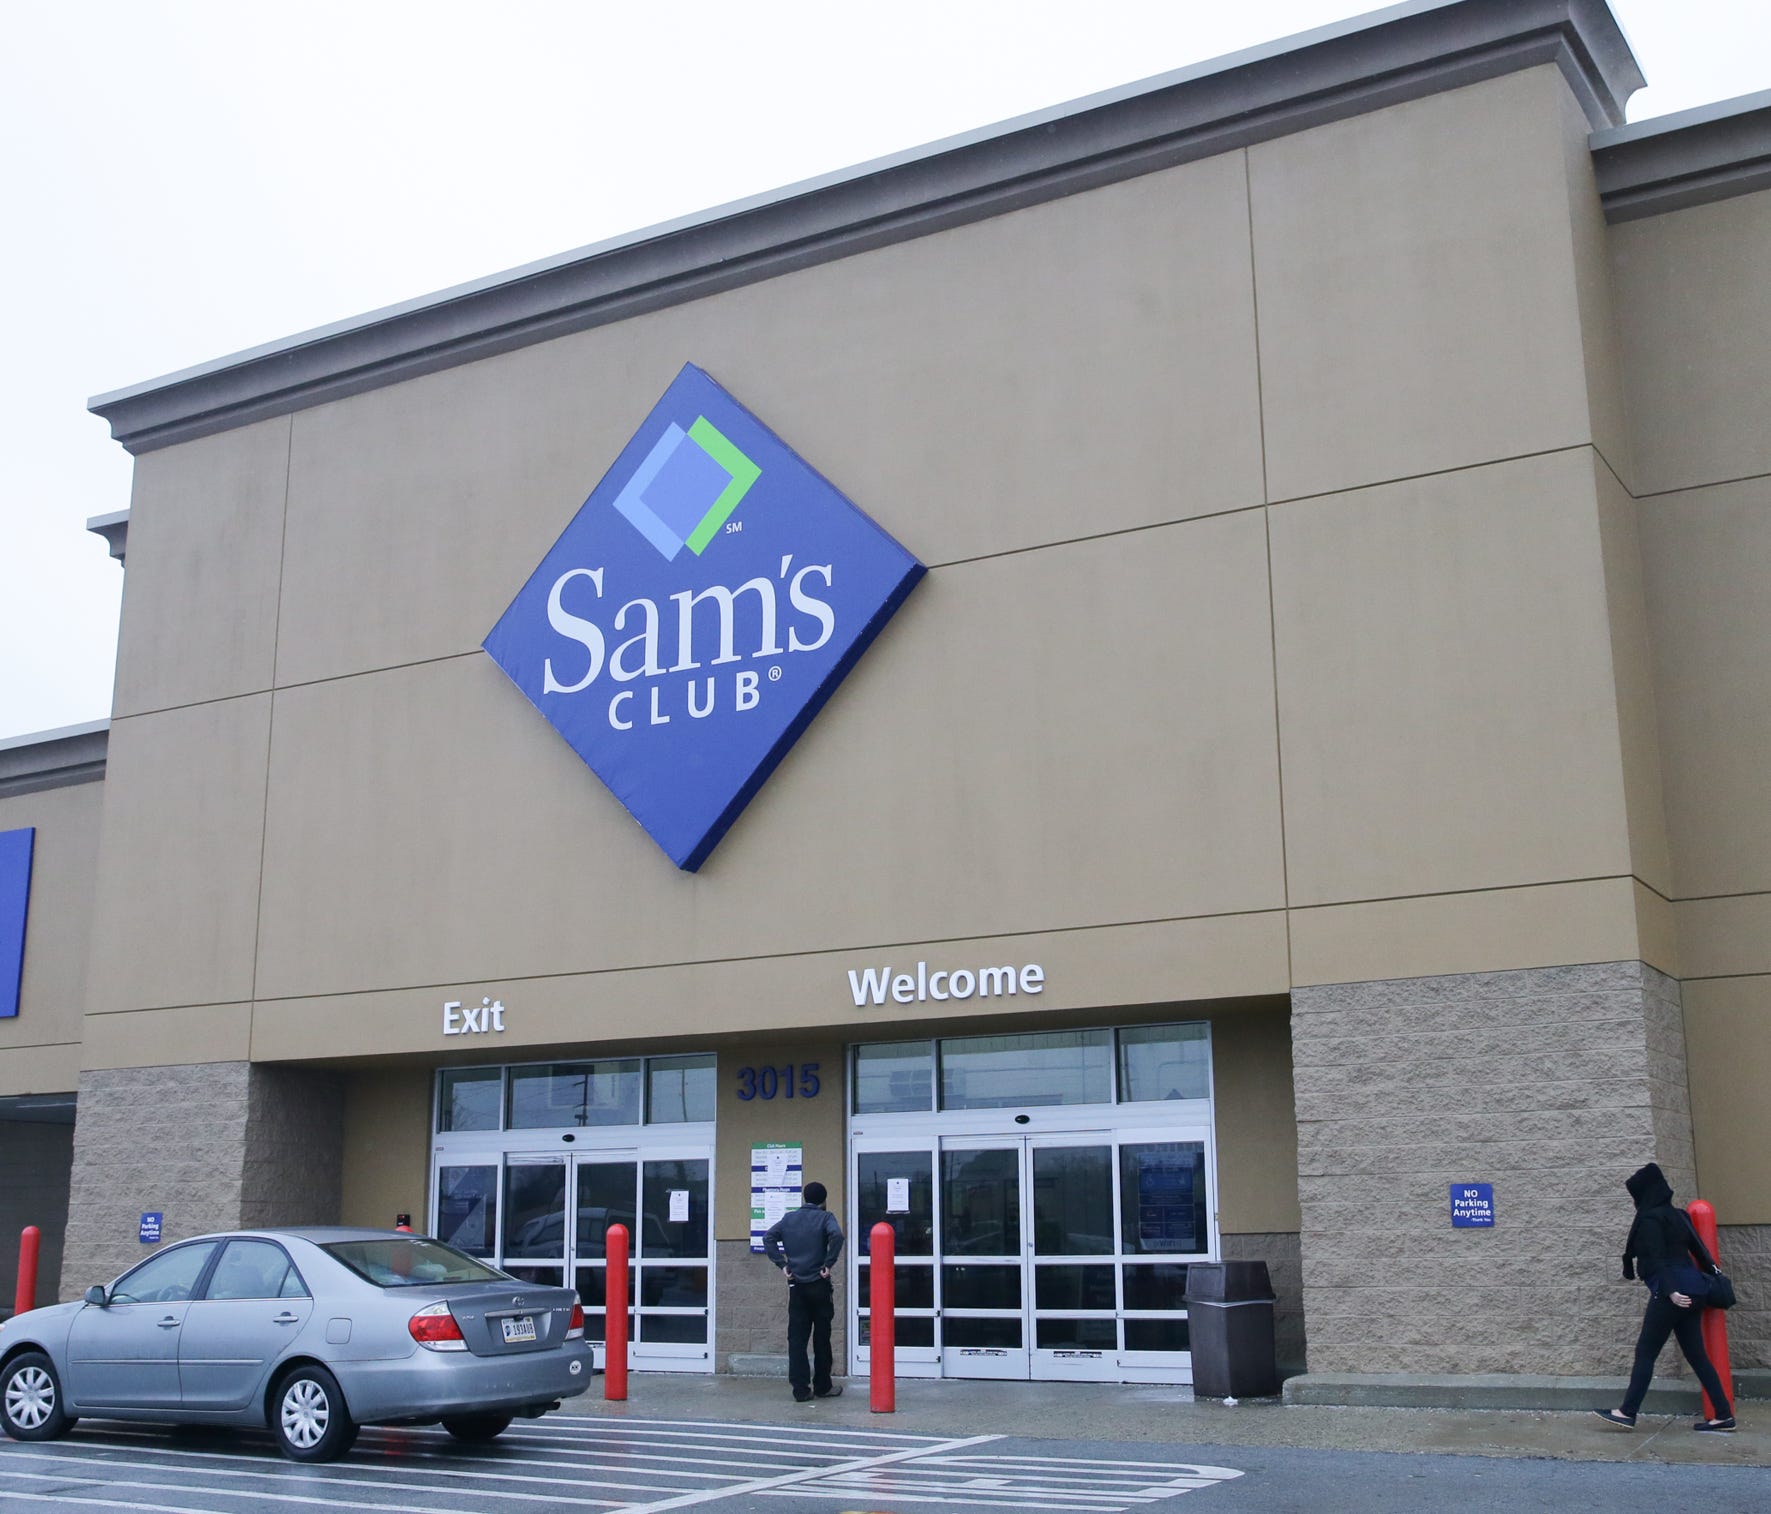 Closed signs and security personnel greeted customers at Sam's Club located at 3015 W. 86th St. in Indianapolis, on Jan. 11, 2017. Sam's Club will be closing three stores in Indiana, including two in Indianapolis.